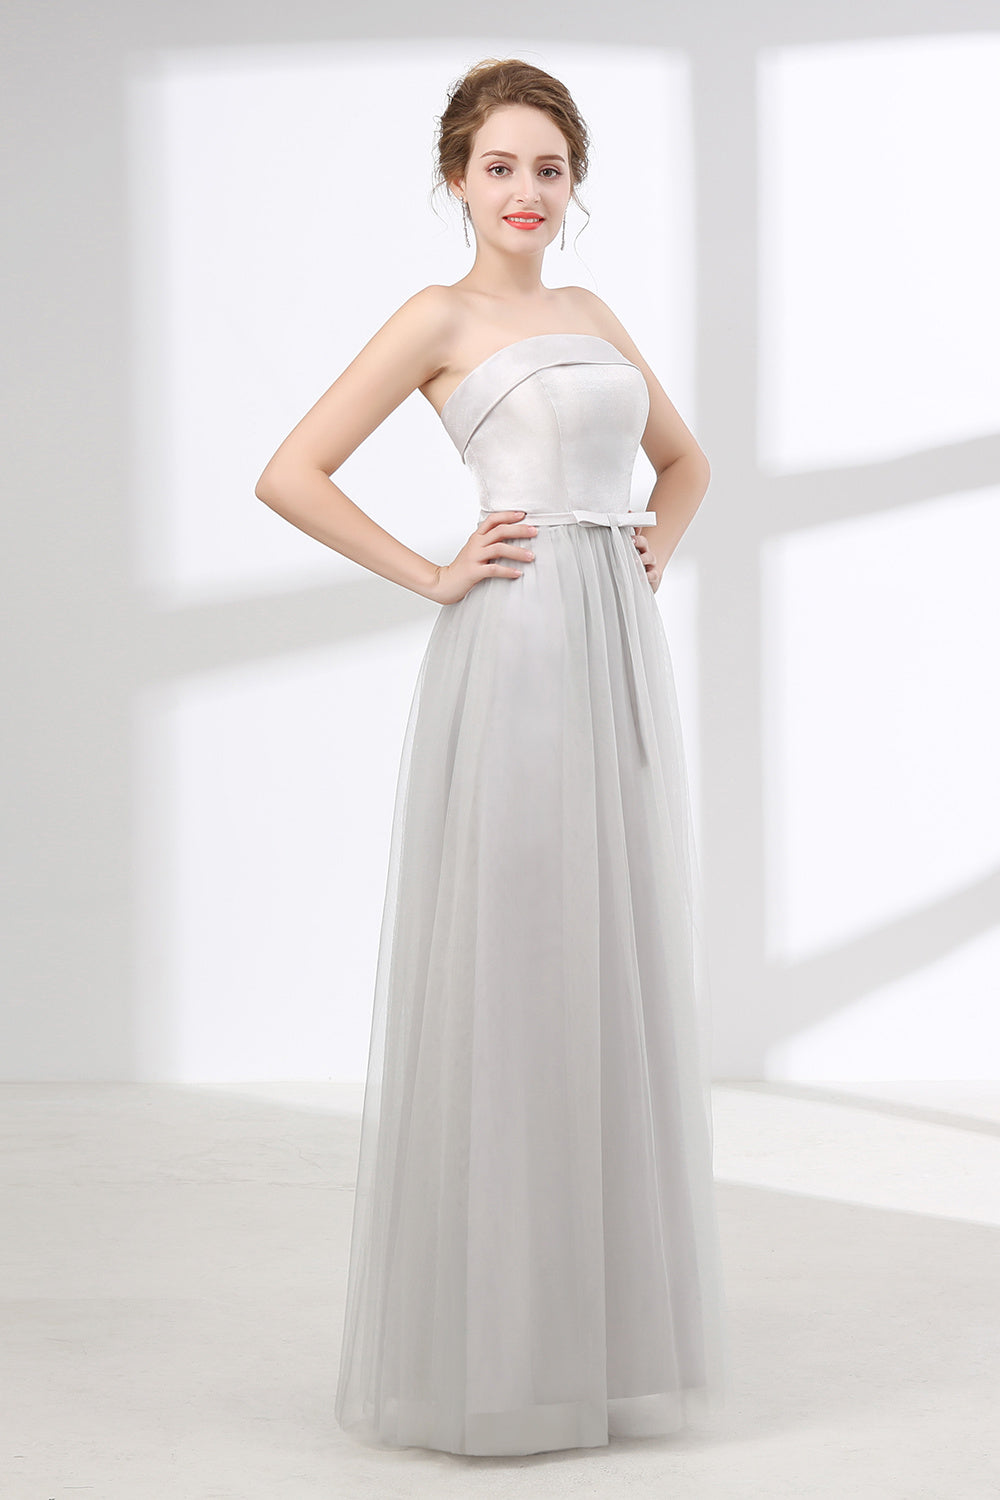 Prom Dress Boutique, Tulle & Satin Strapless Neckline A-line Bridesmaid Dresses With Bowknot